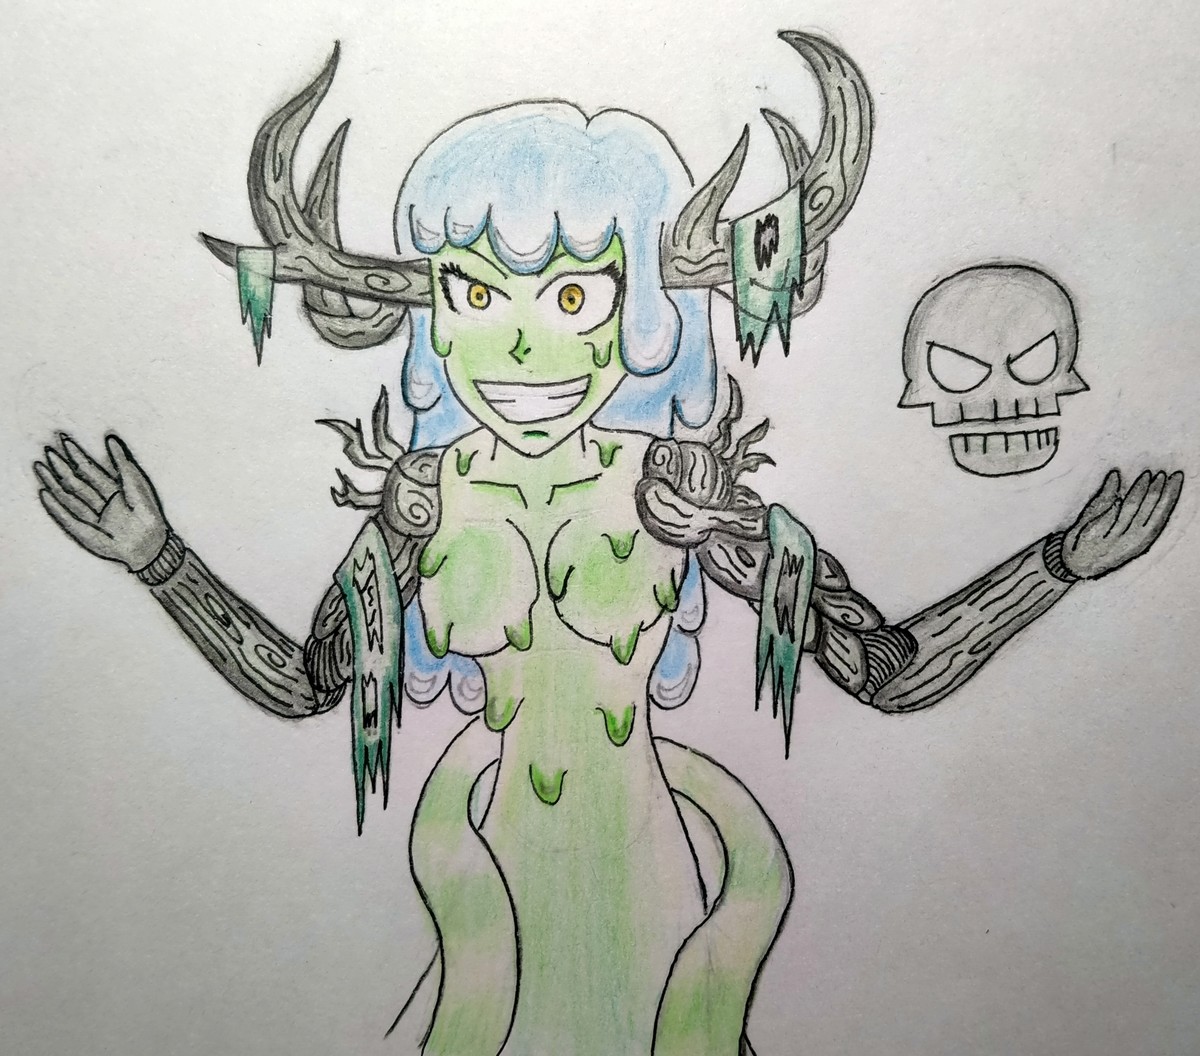 Muldrotha, the weabtide. Attempt in drawing Muldrotha haha and first time drawing slime.. Very cute and based.